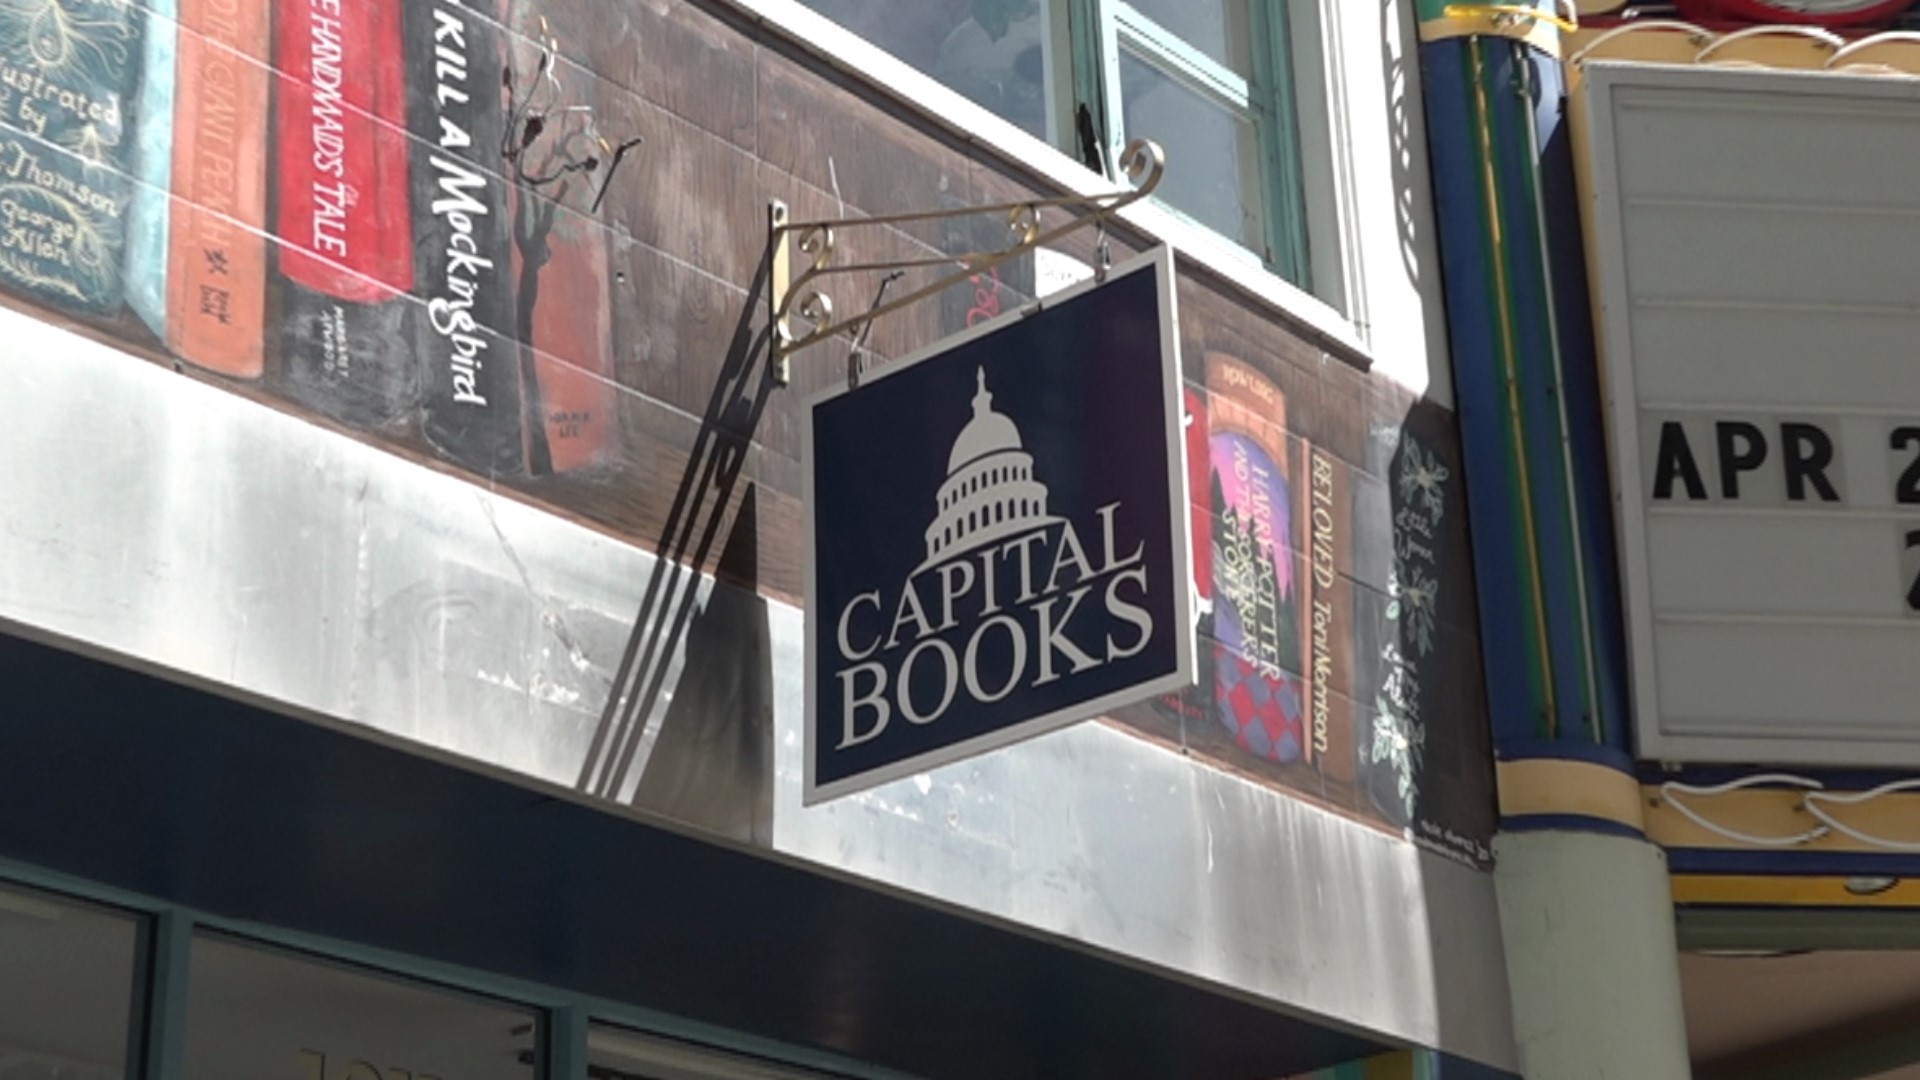 Capital Books is hosting a three-day long event highlighting locally-owned bookstores and educating the community on the importance of reading around the region.